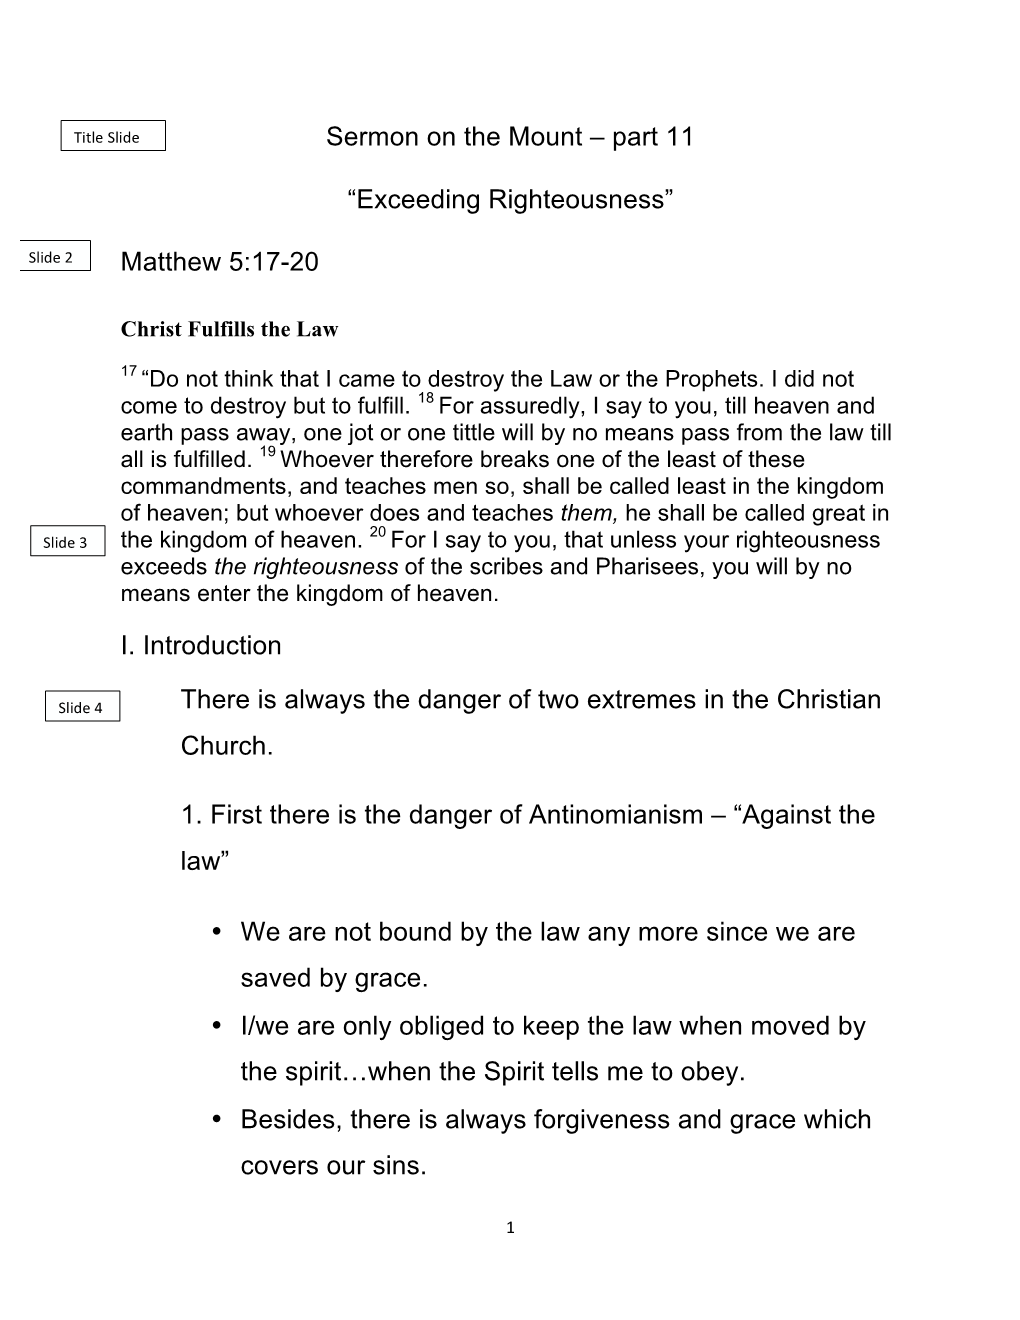 Sermon on the Mount – Part 11 “Exceeding Righteousness” Matthew 5:17-20 I. Introduction There Is Always the Danger Of